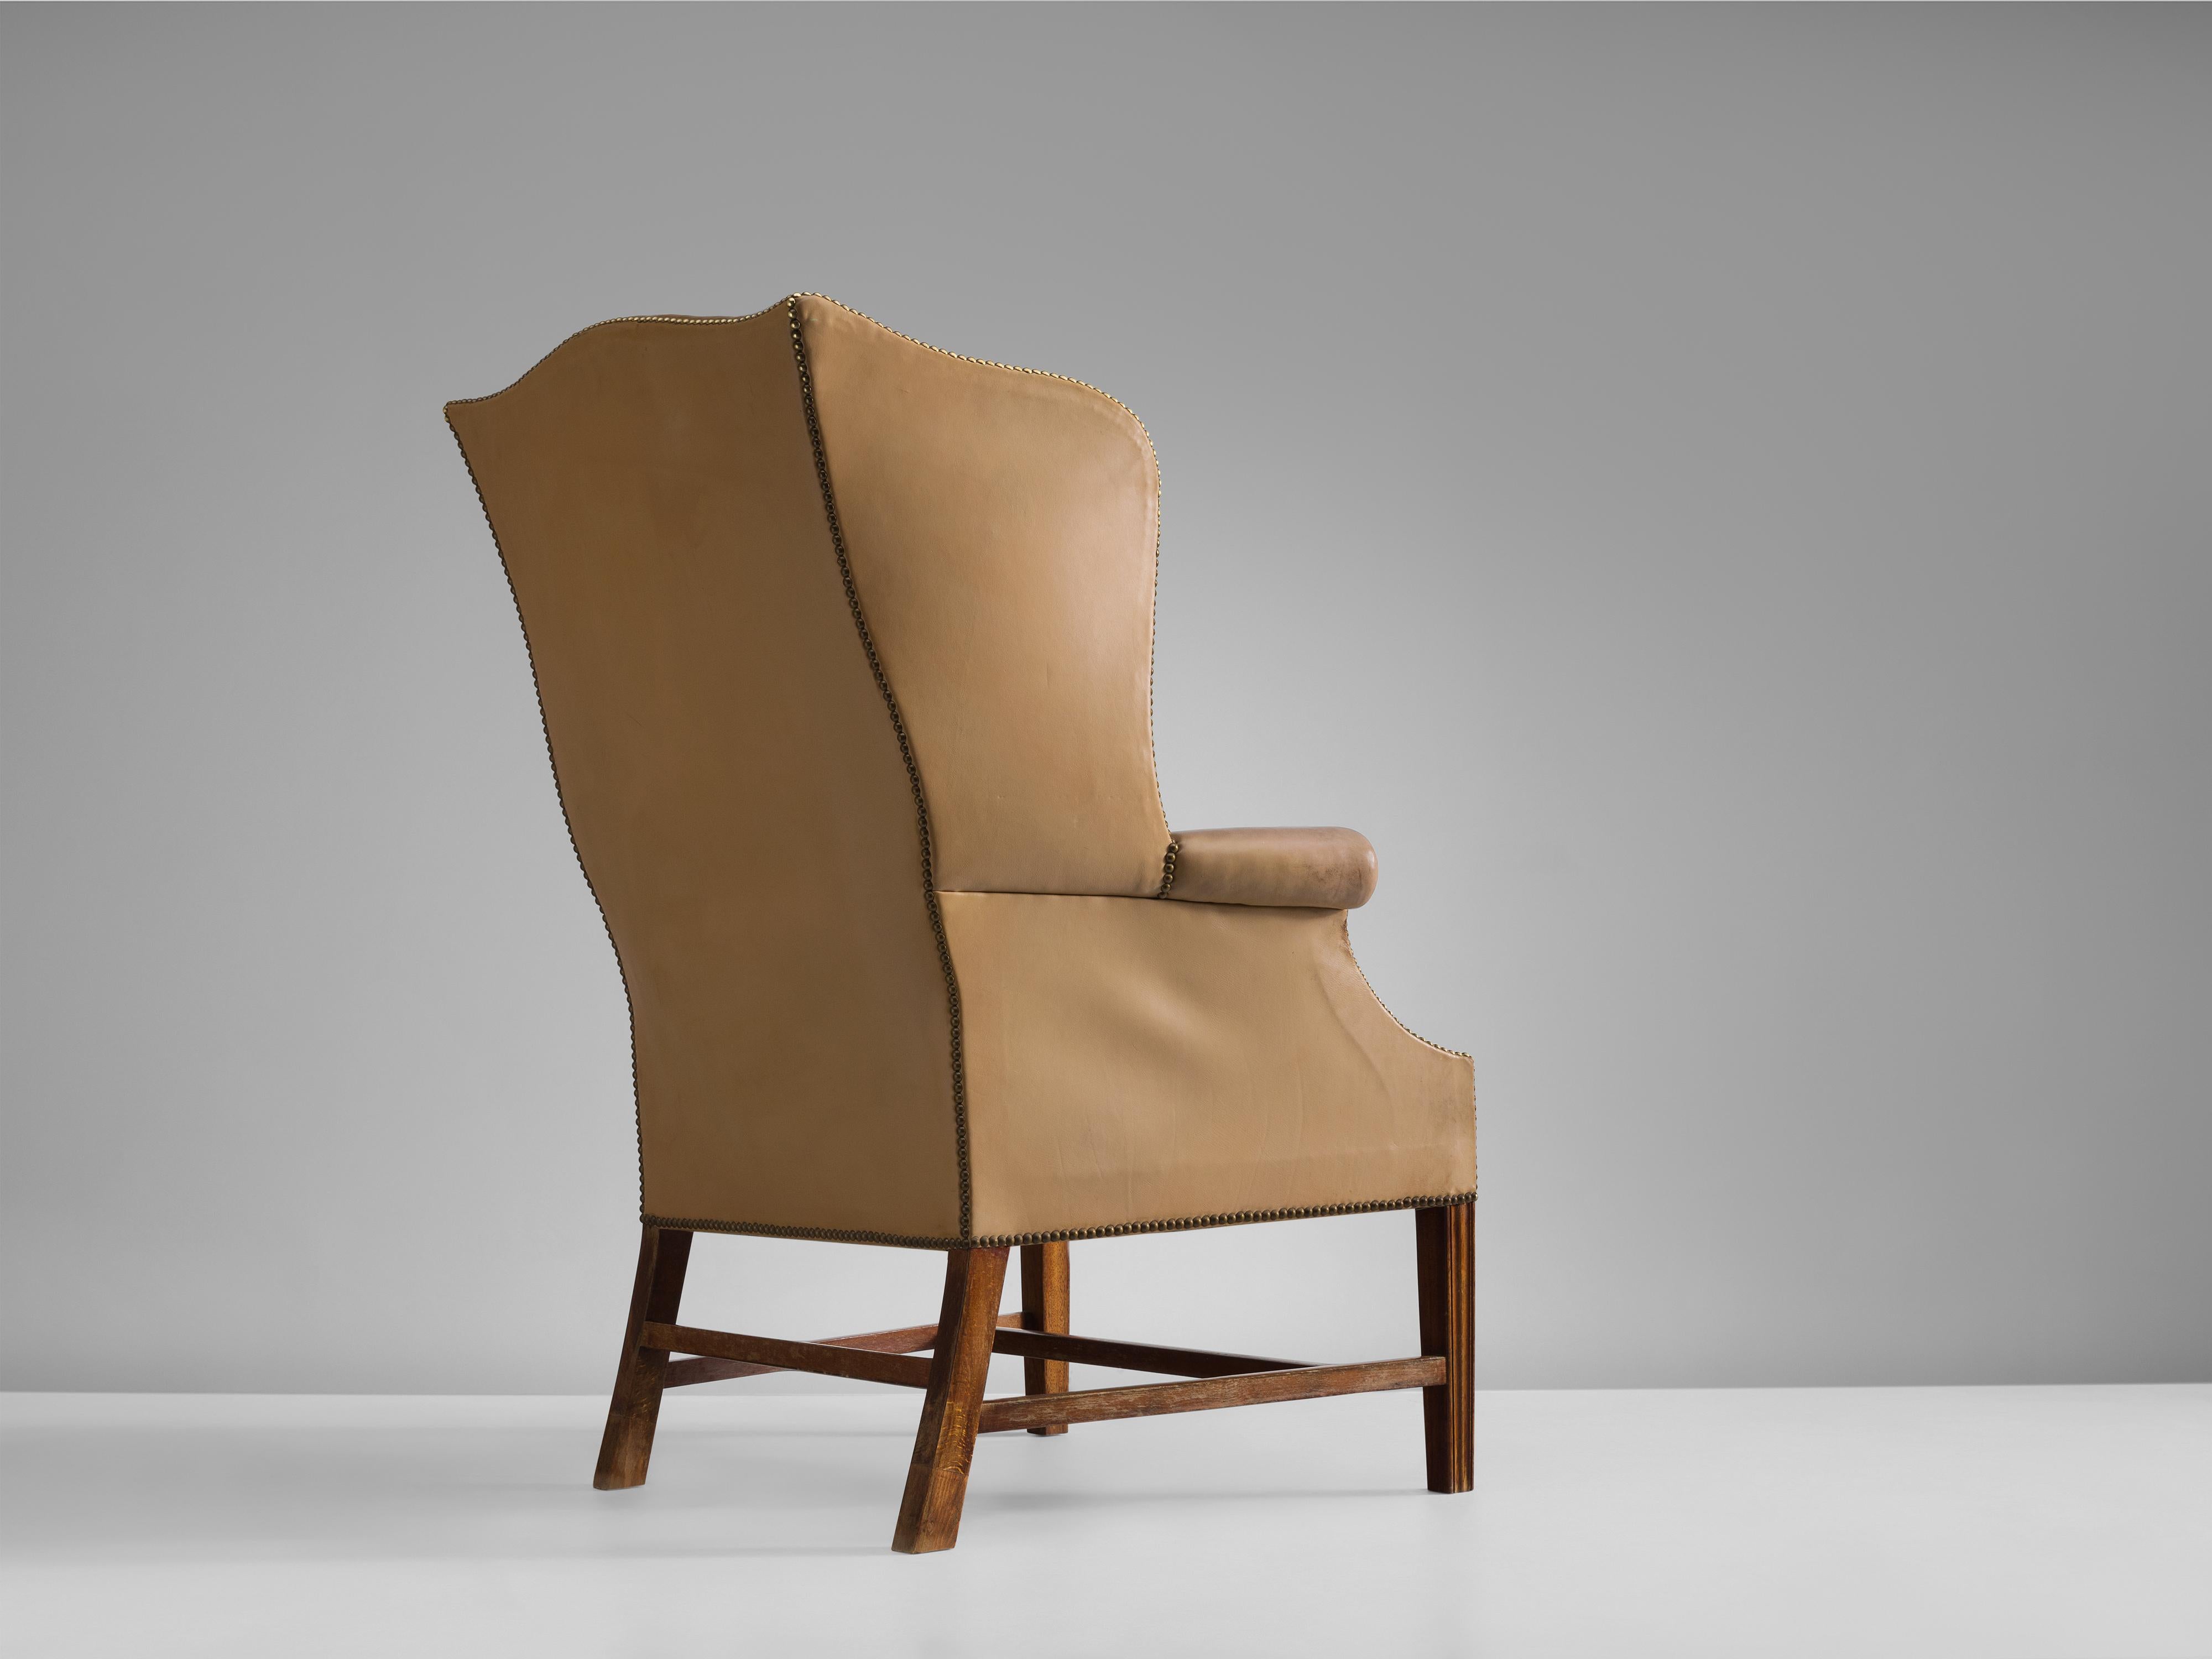 Peter Hvidt & Orla Mølgaard Nielsen, wingback chair, patinated leather, mahogany and brass, Denmark, 1940s

Danish armchair with a classic design, by Peter Hvidt & Orla Mølgaard Nielsen designed in the forties. This ornate, royal lounge chair is